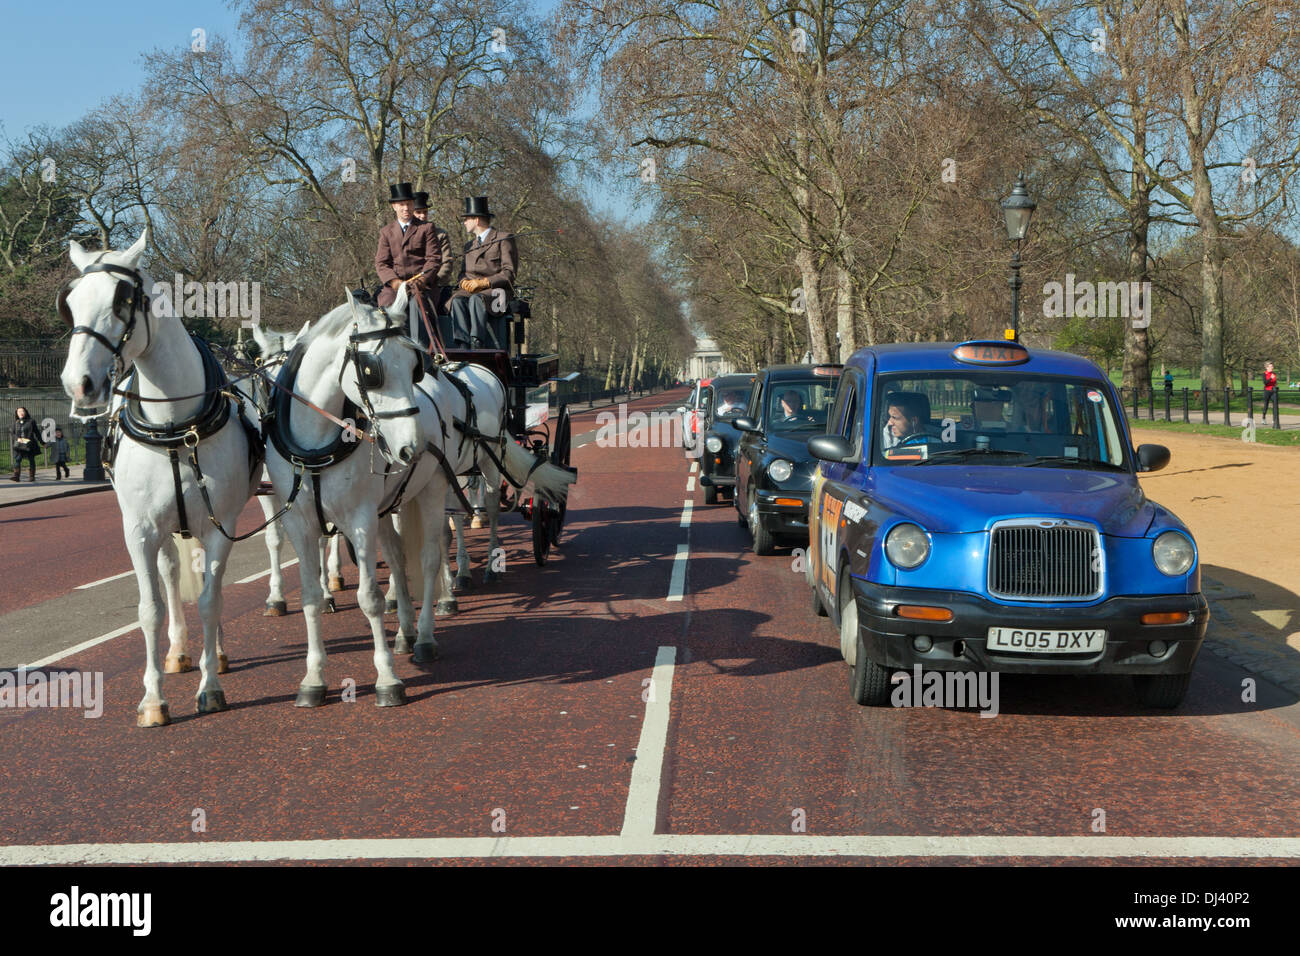 London black taxi cab and horse carriage in one shot Stock Photo